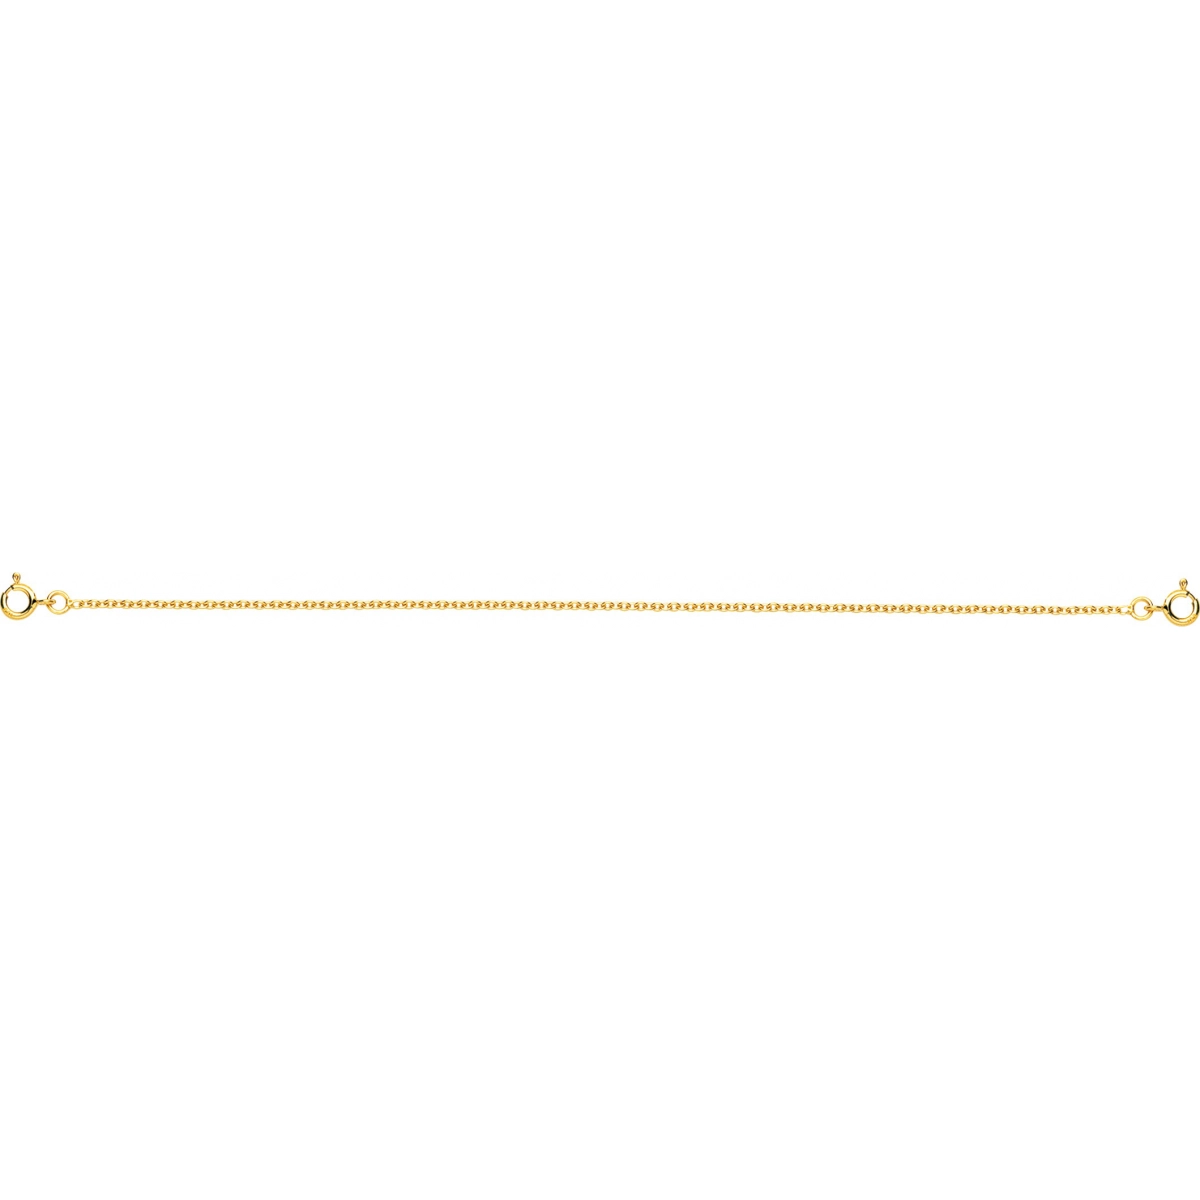 Necklace 'link chain' 18K YG - Size: 42  Lua Blanca  FR45.42